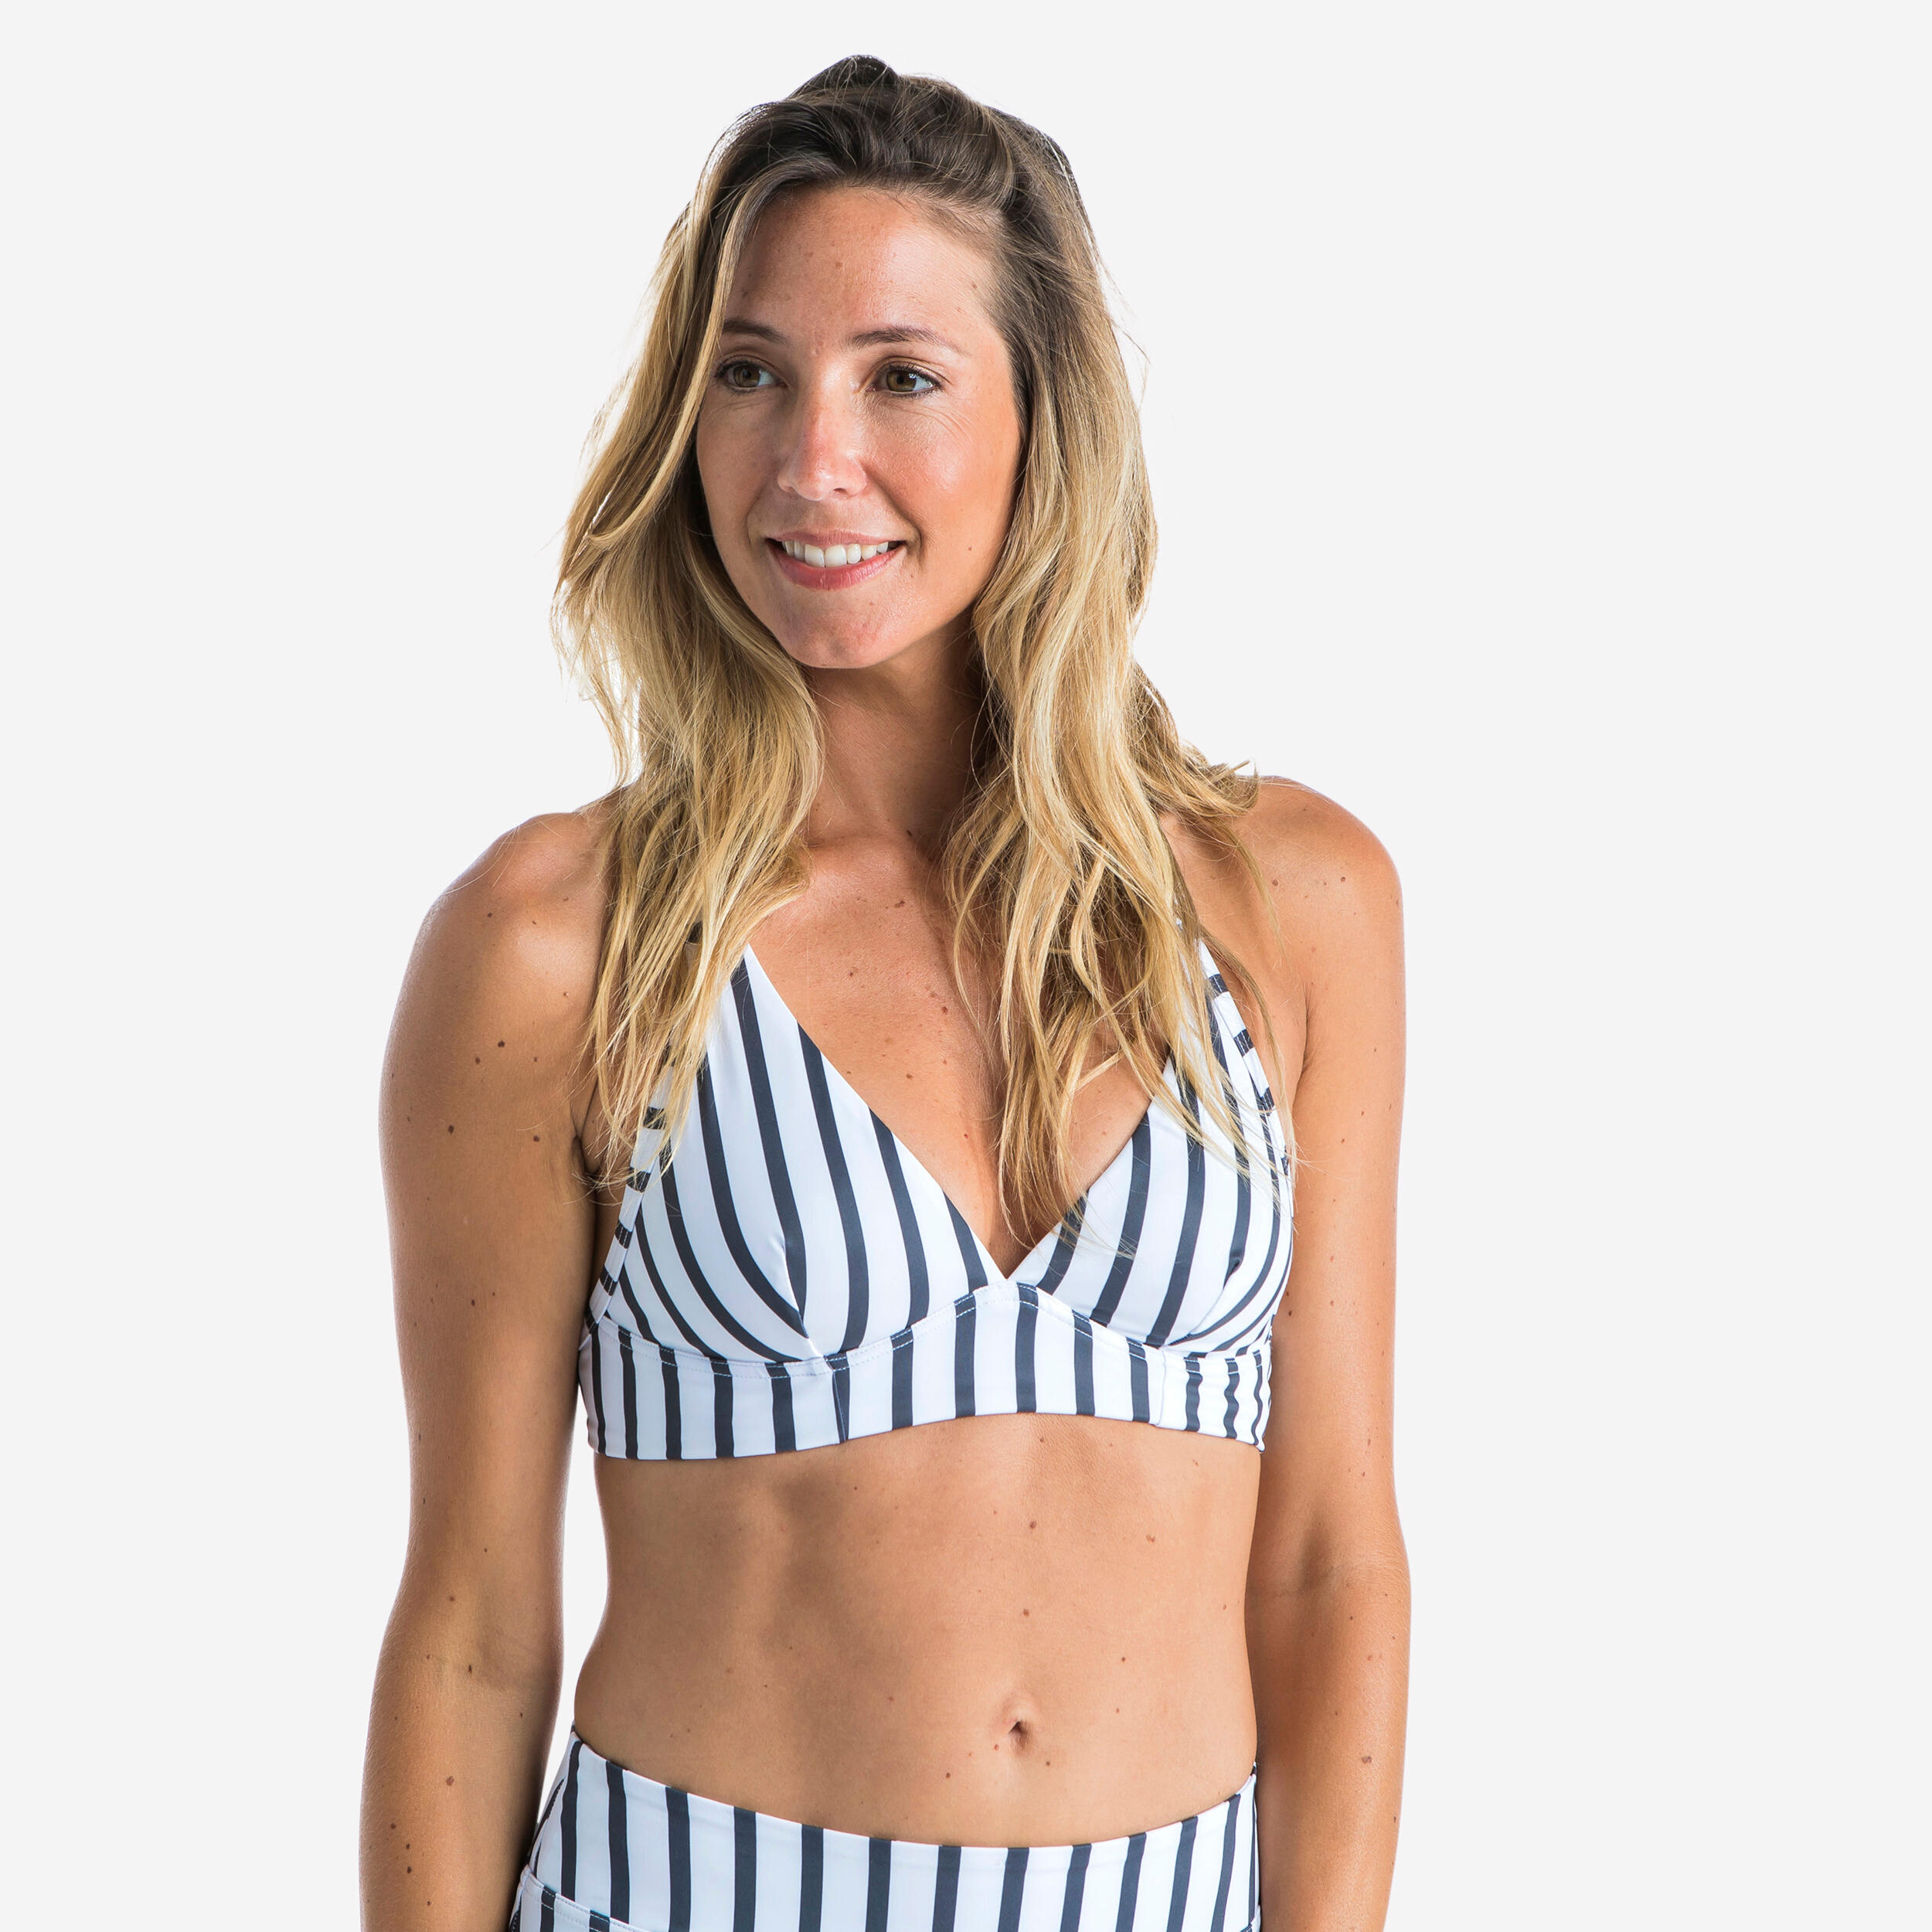 Women's Surfing Swimsuit Crop Top with Adjustable Back BEA MARIN - WHITE GREY 1/13